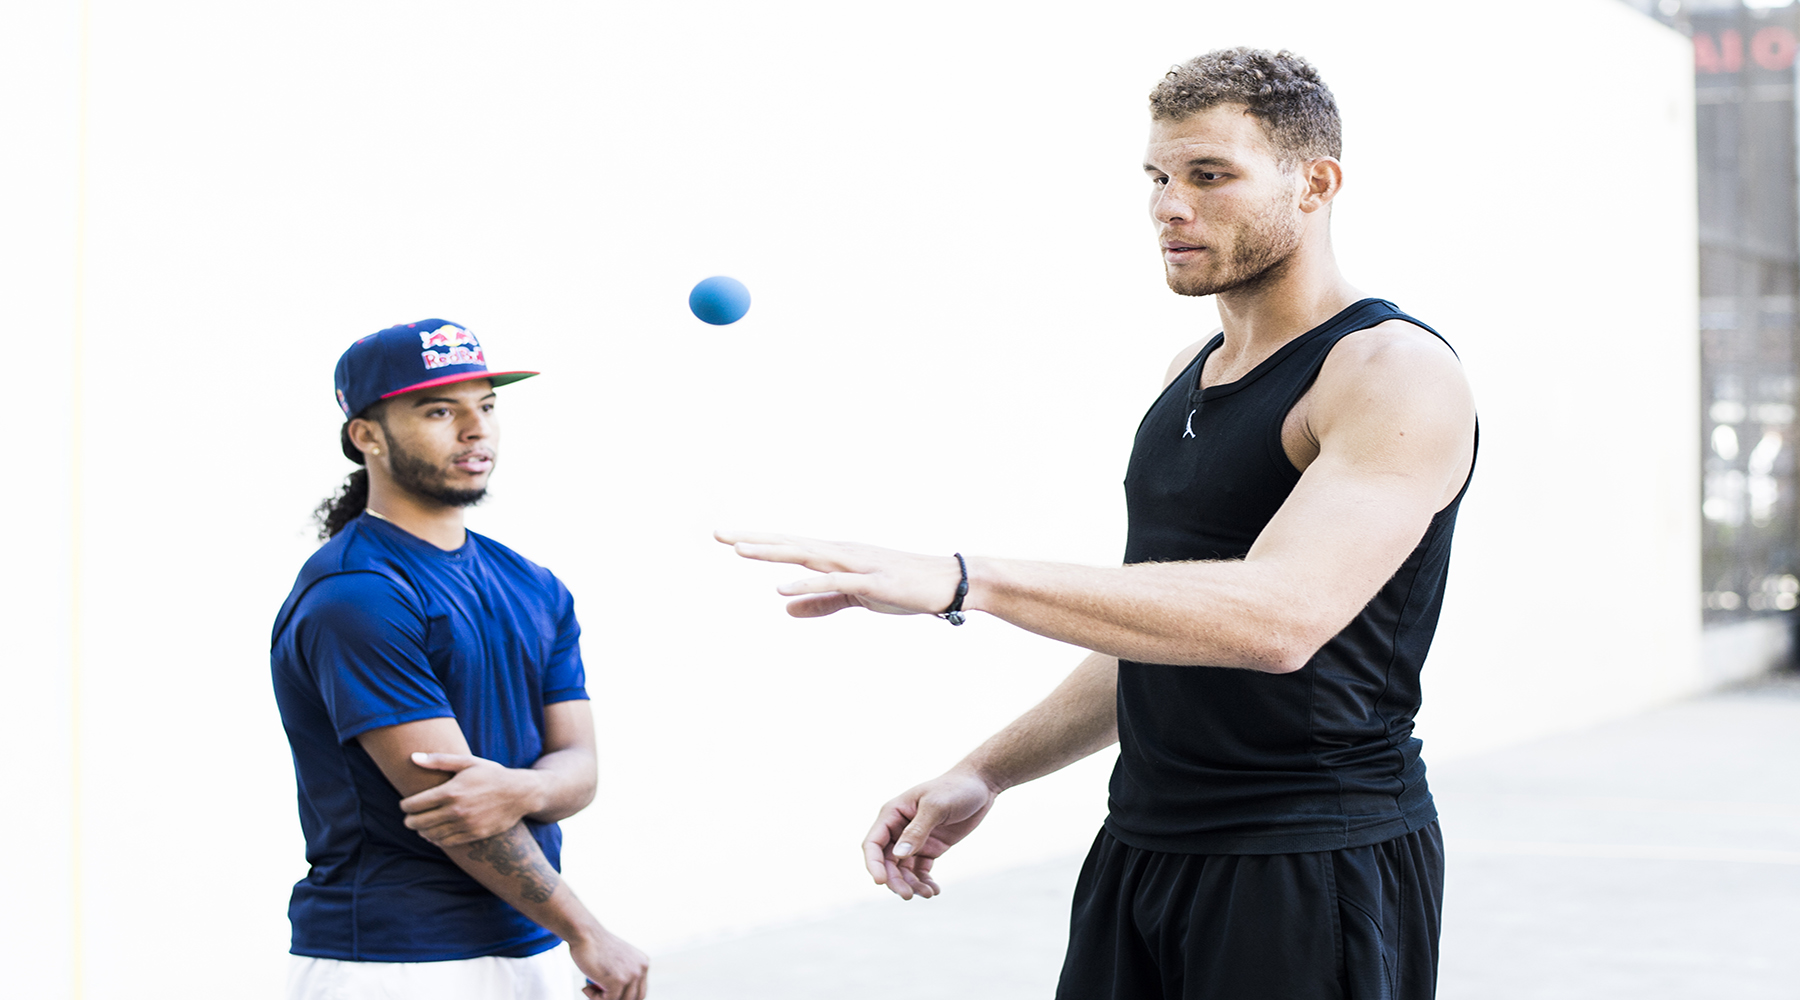 NBA player Blake Griffin trains with handball player Timbo at the the West 4th Street handball courts in New York, NY USA on 15 September, 2015. // Rob Tringali/Red Bull Content Pool // P-20151007-00506 // Usage for editorial use only // Please go to www.redbullcontentpool.com for further information. //